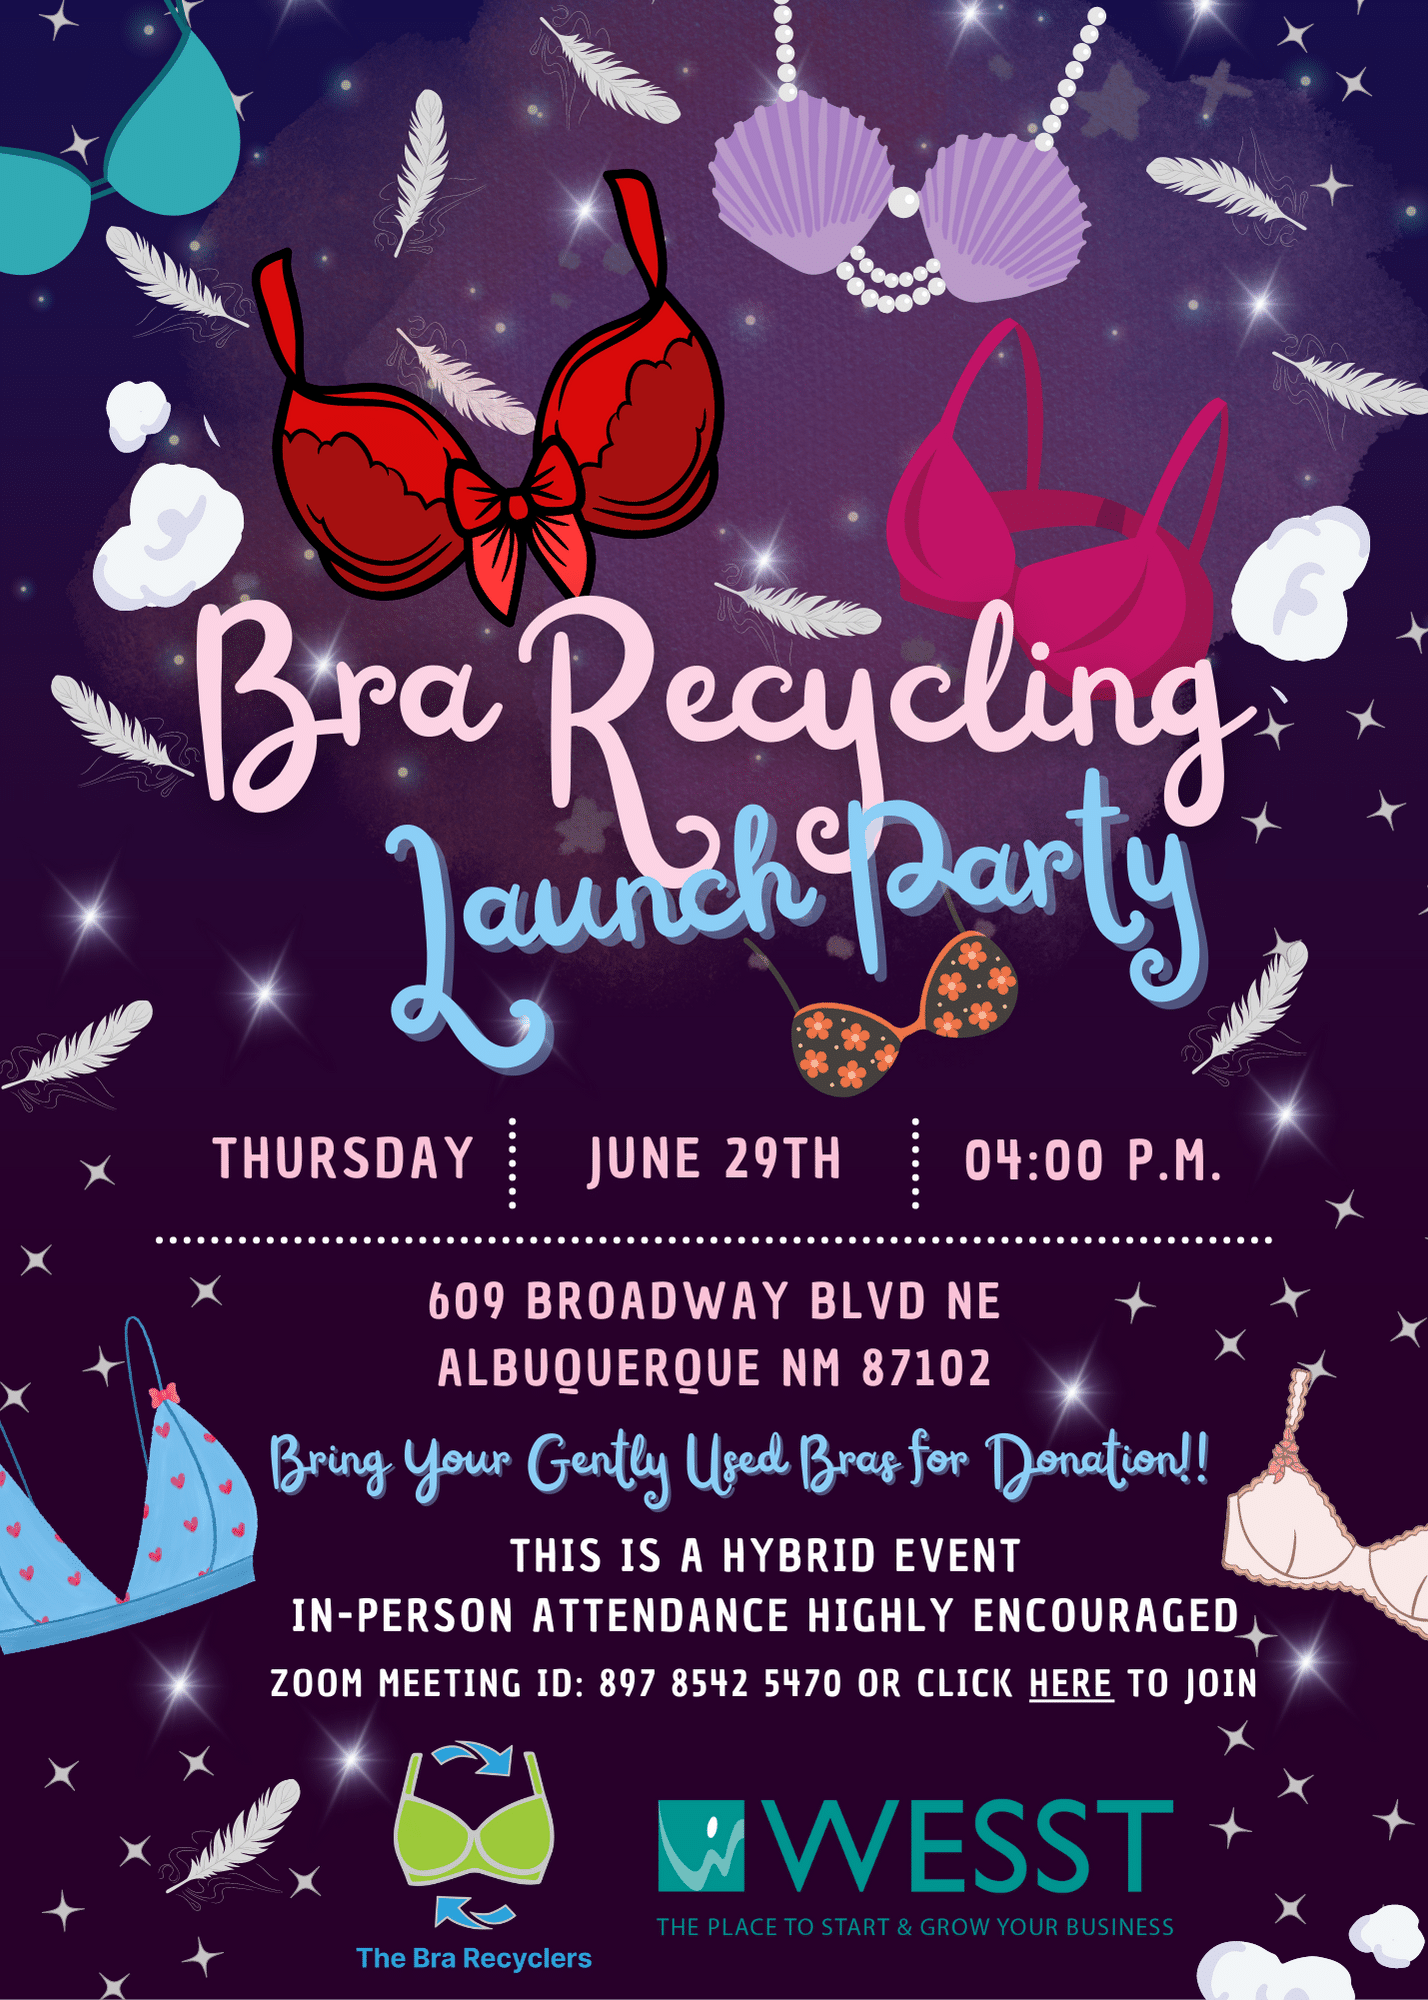 https://www.wesst.org/wp-content/uploads/2023/06/Youre-Invited-Bra-Recycling-Launch-Party.png